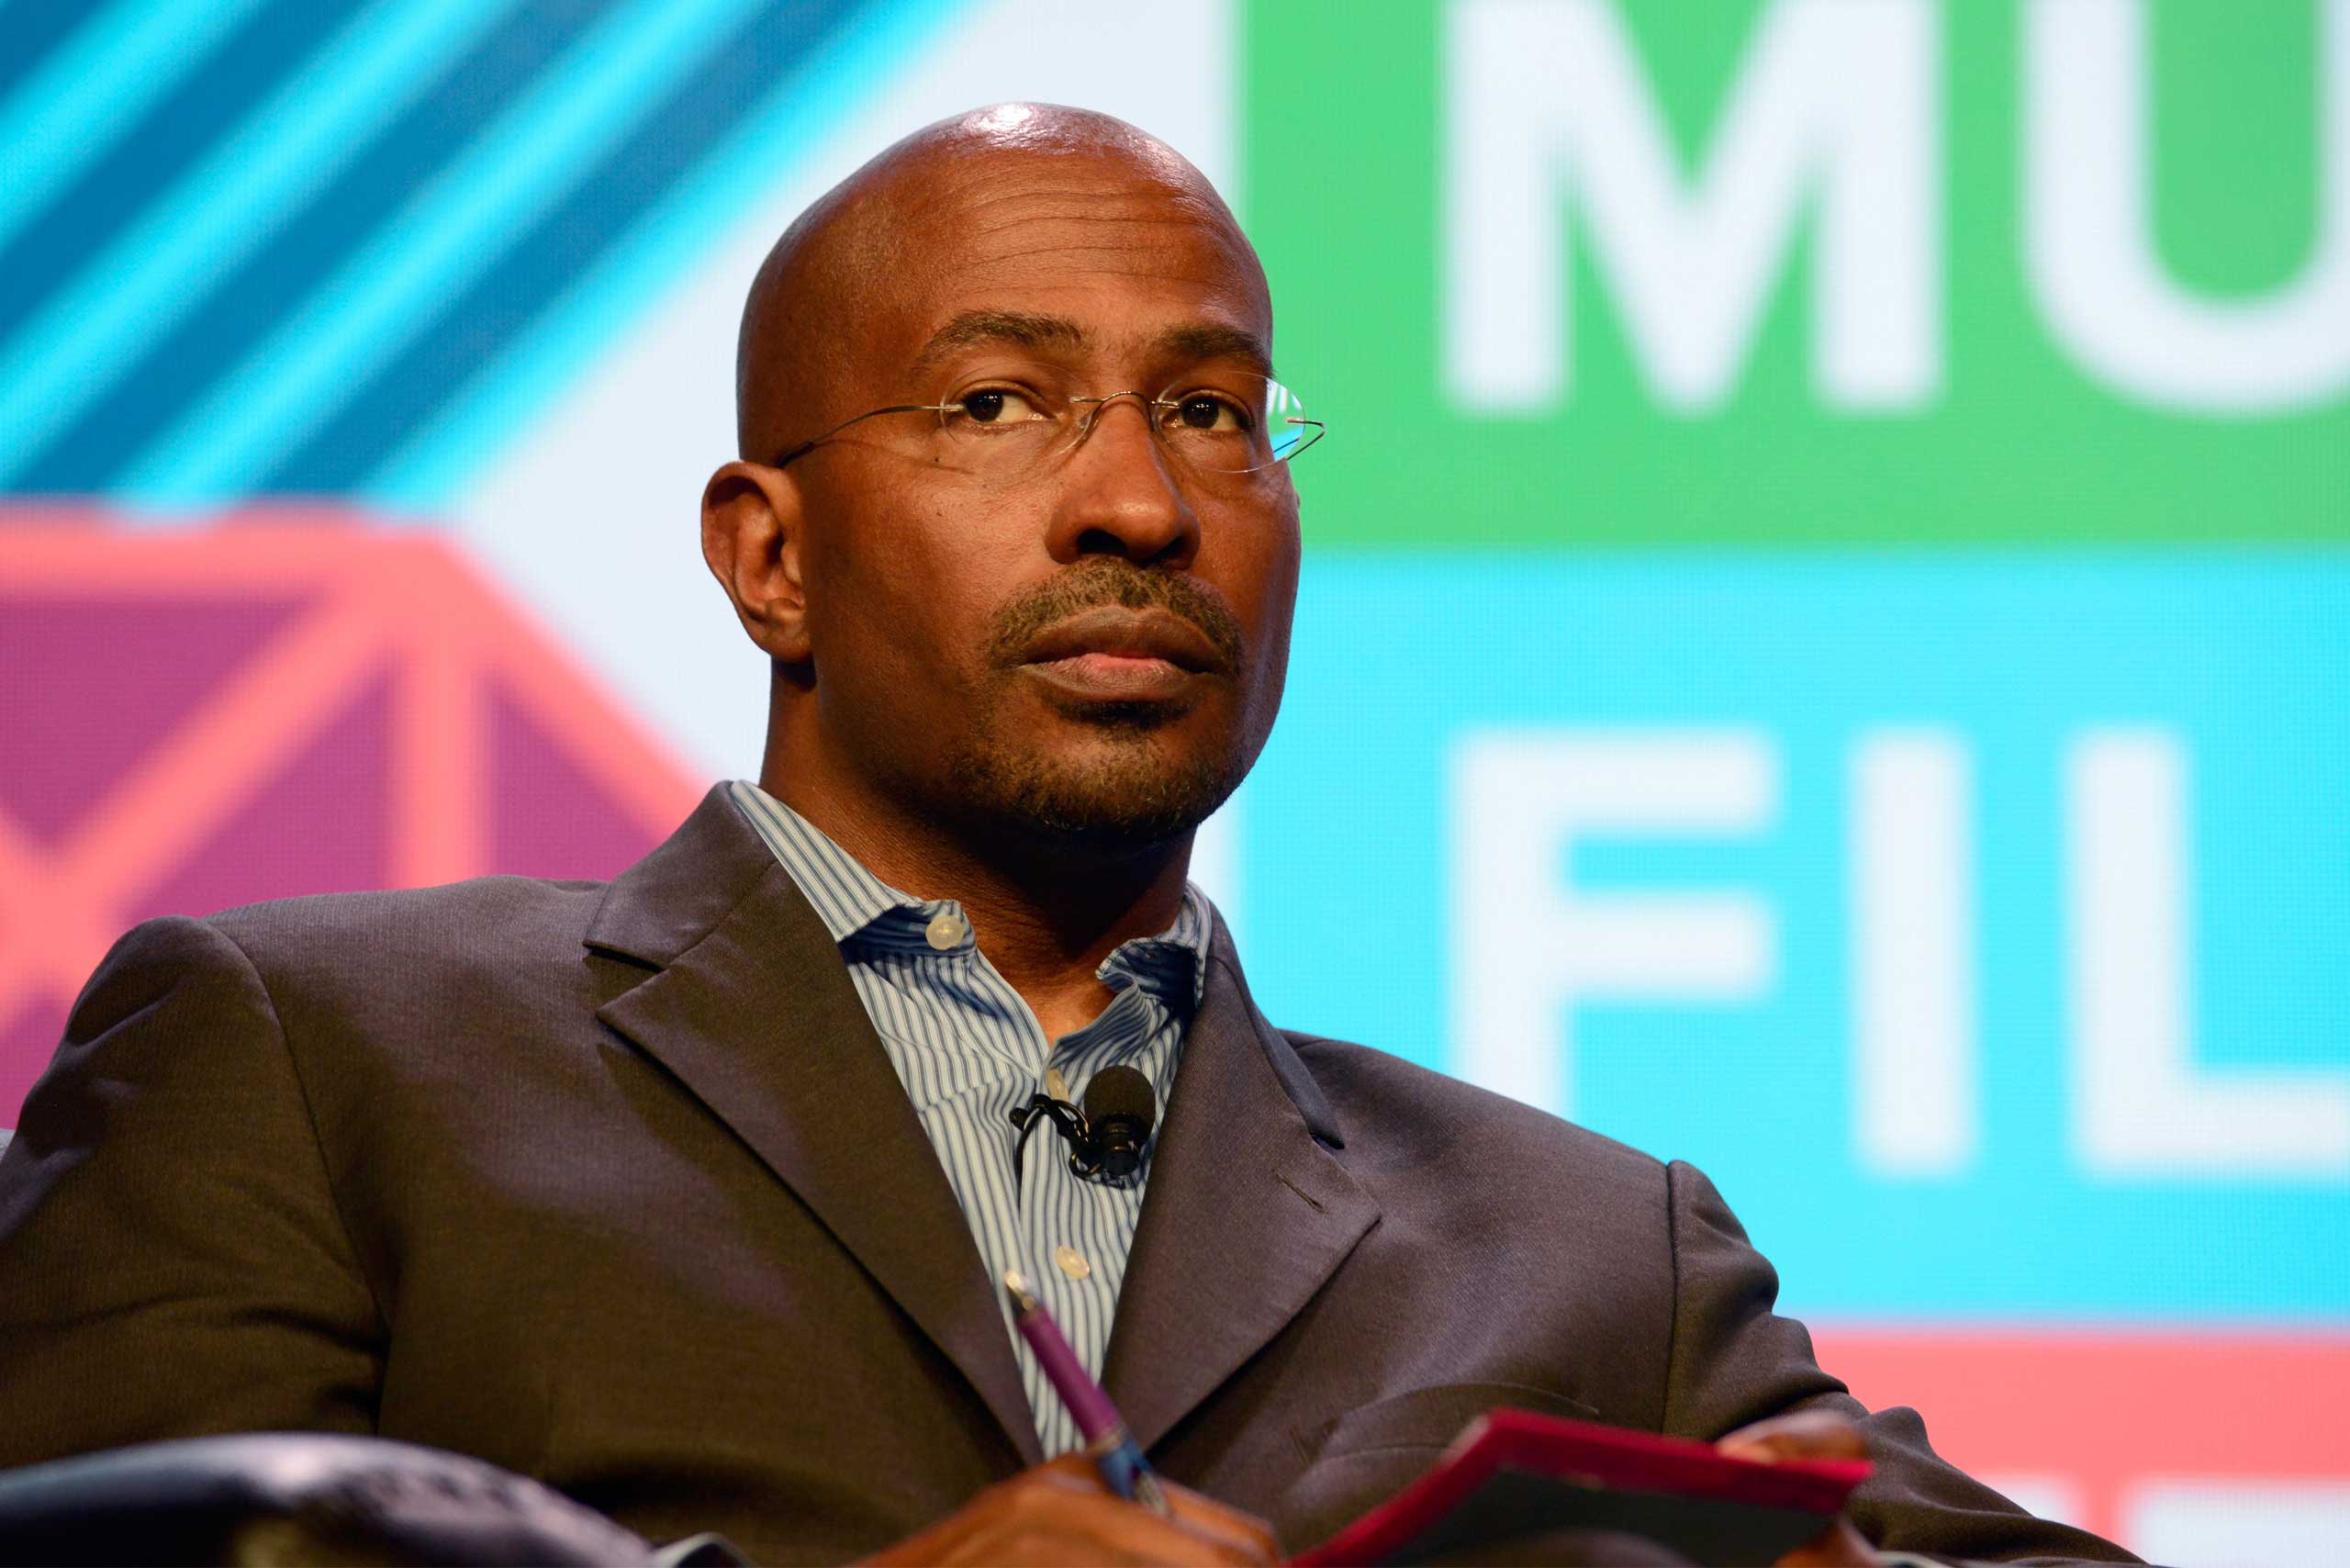 Civil rights activist Van Jones speaks onstage at '#YesWeCode: From The 'Hood To Silicon Valley' during the 2015 SXSW Music, Film + Interactive Festival at Austin Convention Center in Austin on March 16, 2015. (Robert A Tobiansky–Getty Images)